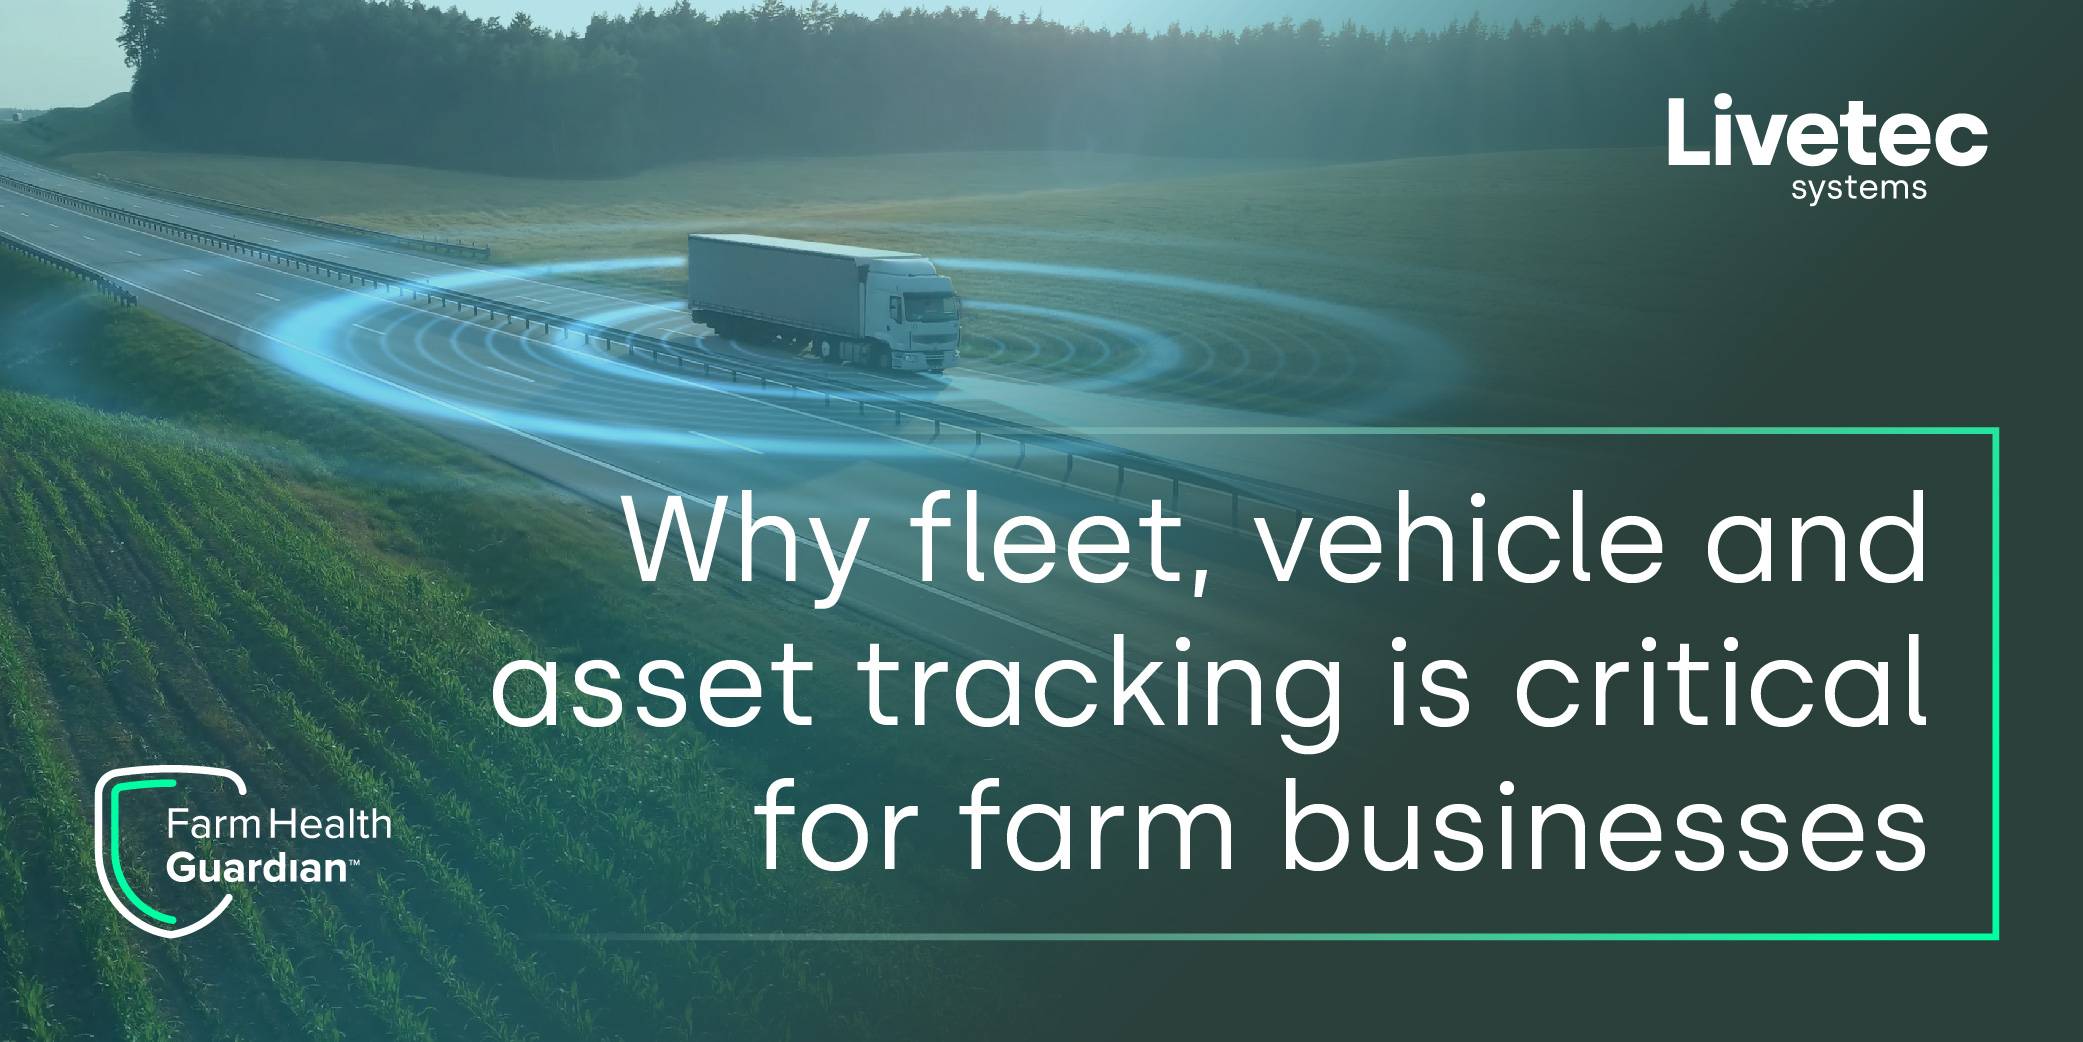 Why fleet, vehicle and asset tracking is critical blog cover